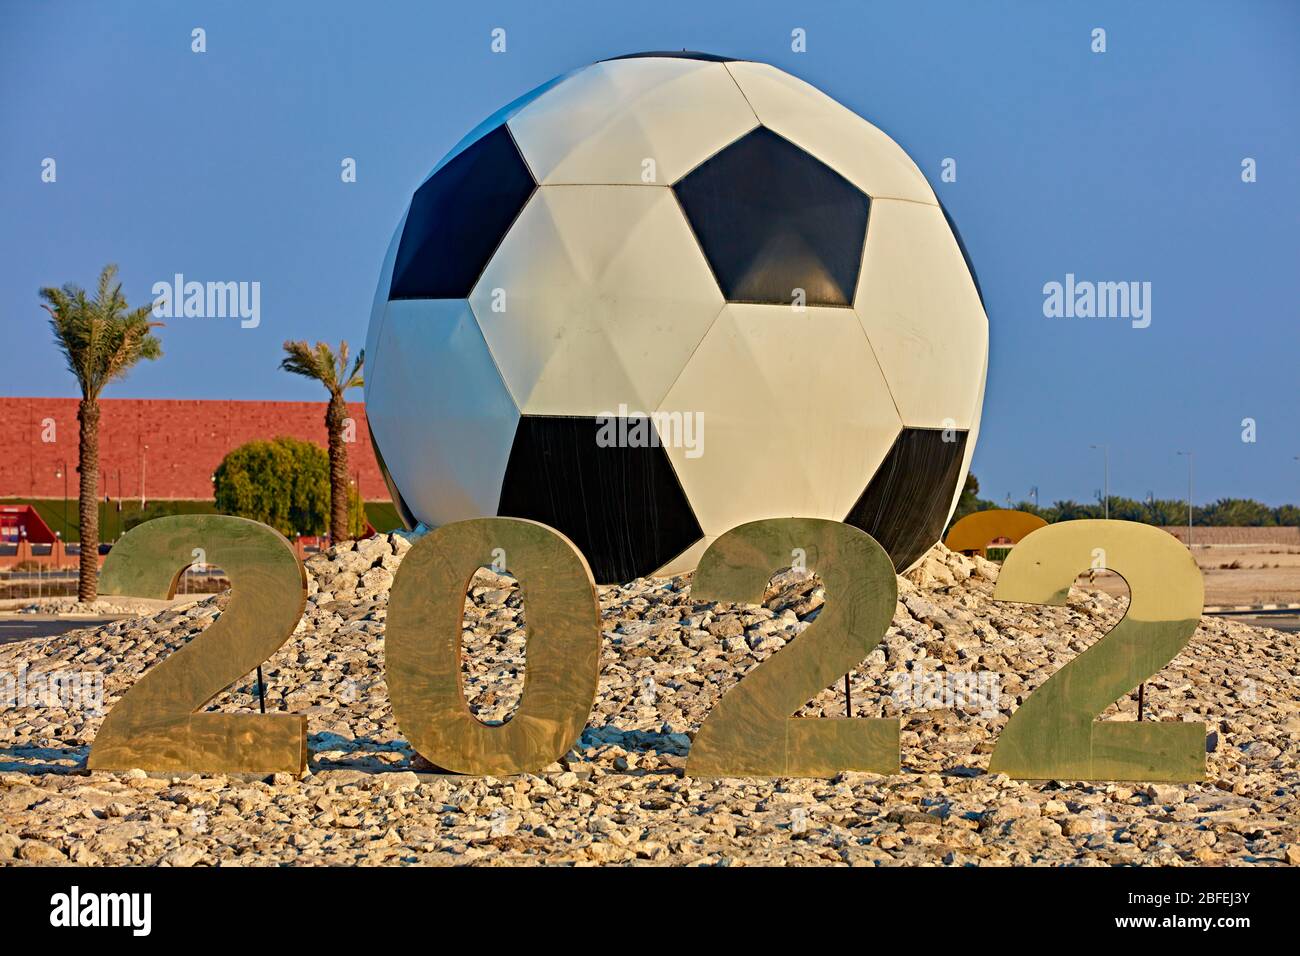 giant soccer football sculpture soccer made for the world cup Qatar Stock Photo